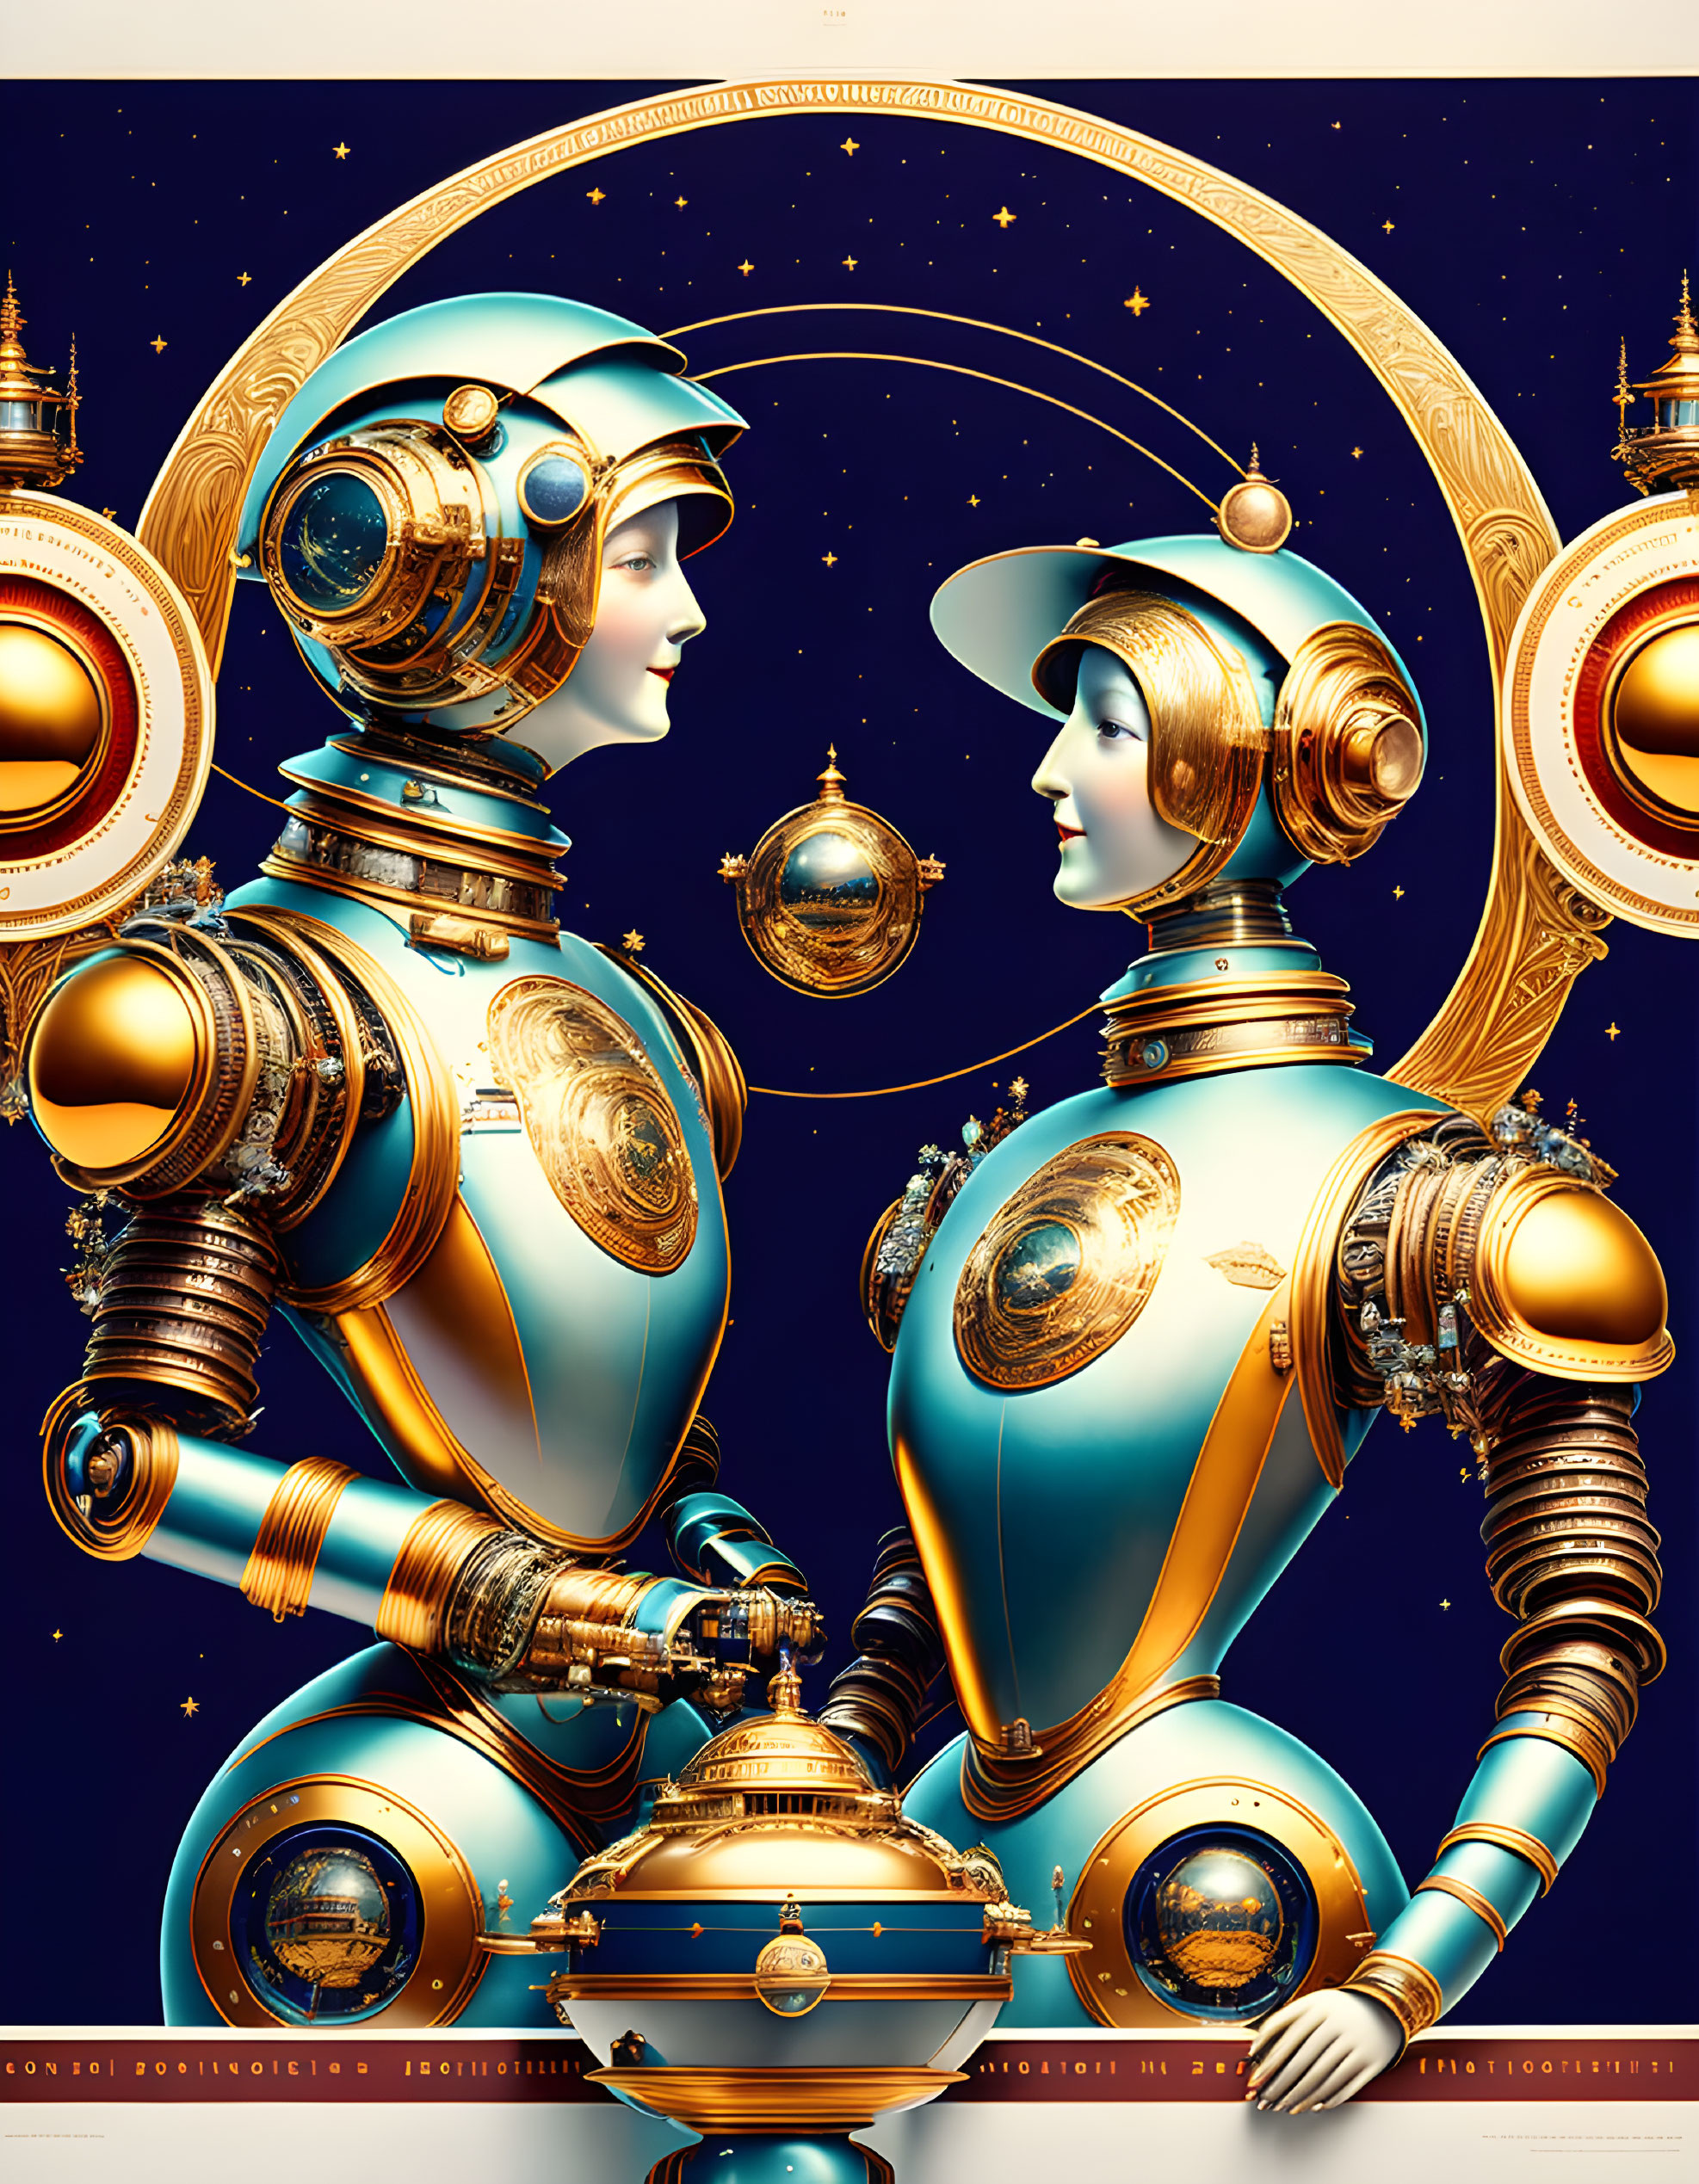 Detailed futuristic robots with human-like features surrounded by celestial motifs and intricate golden designs on blue background.